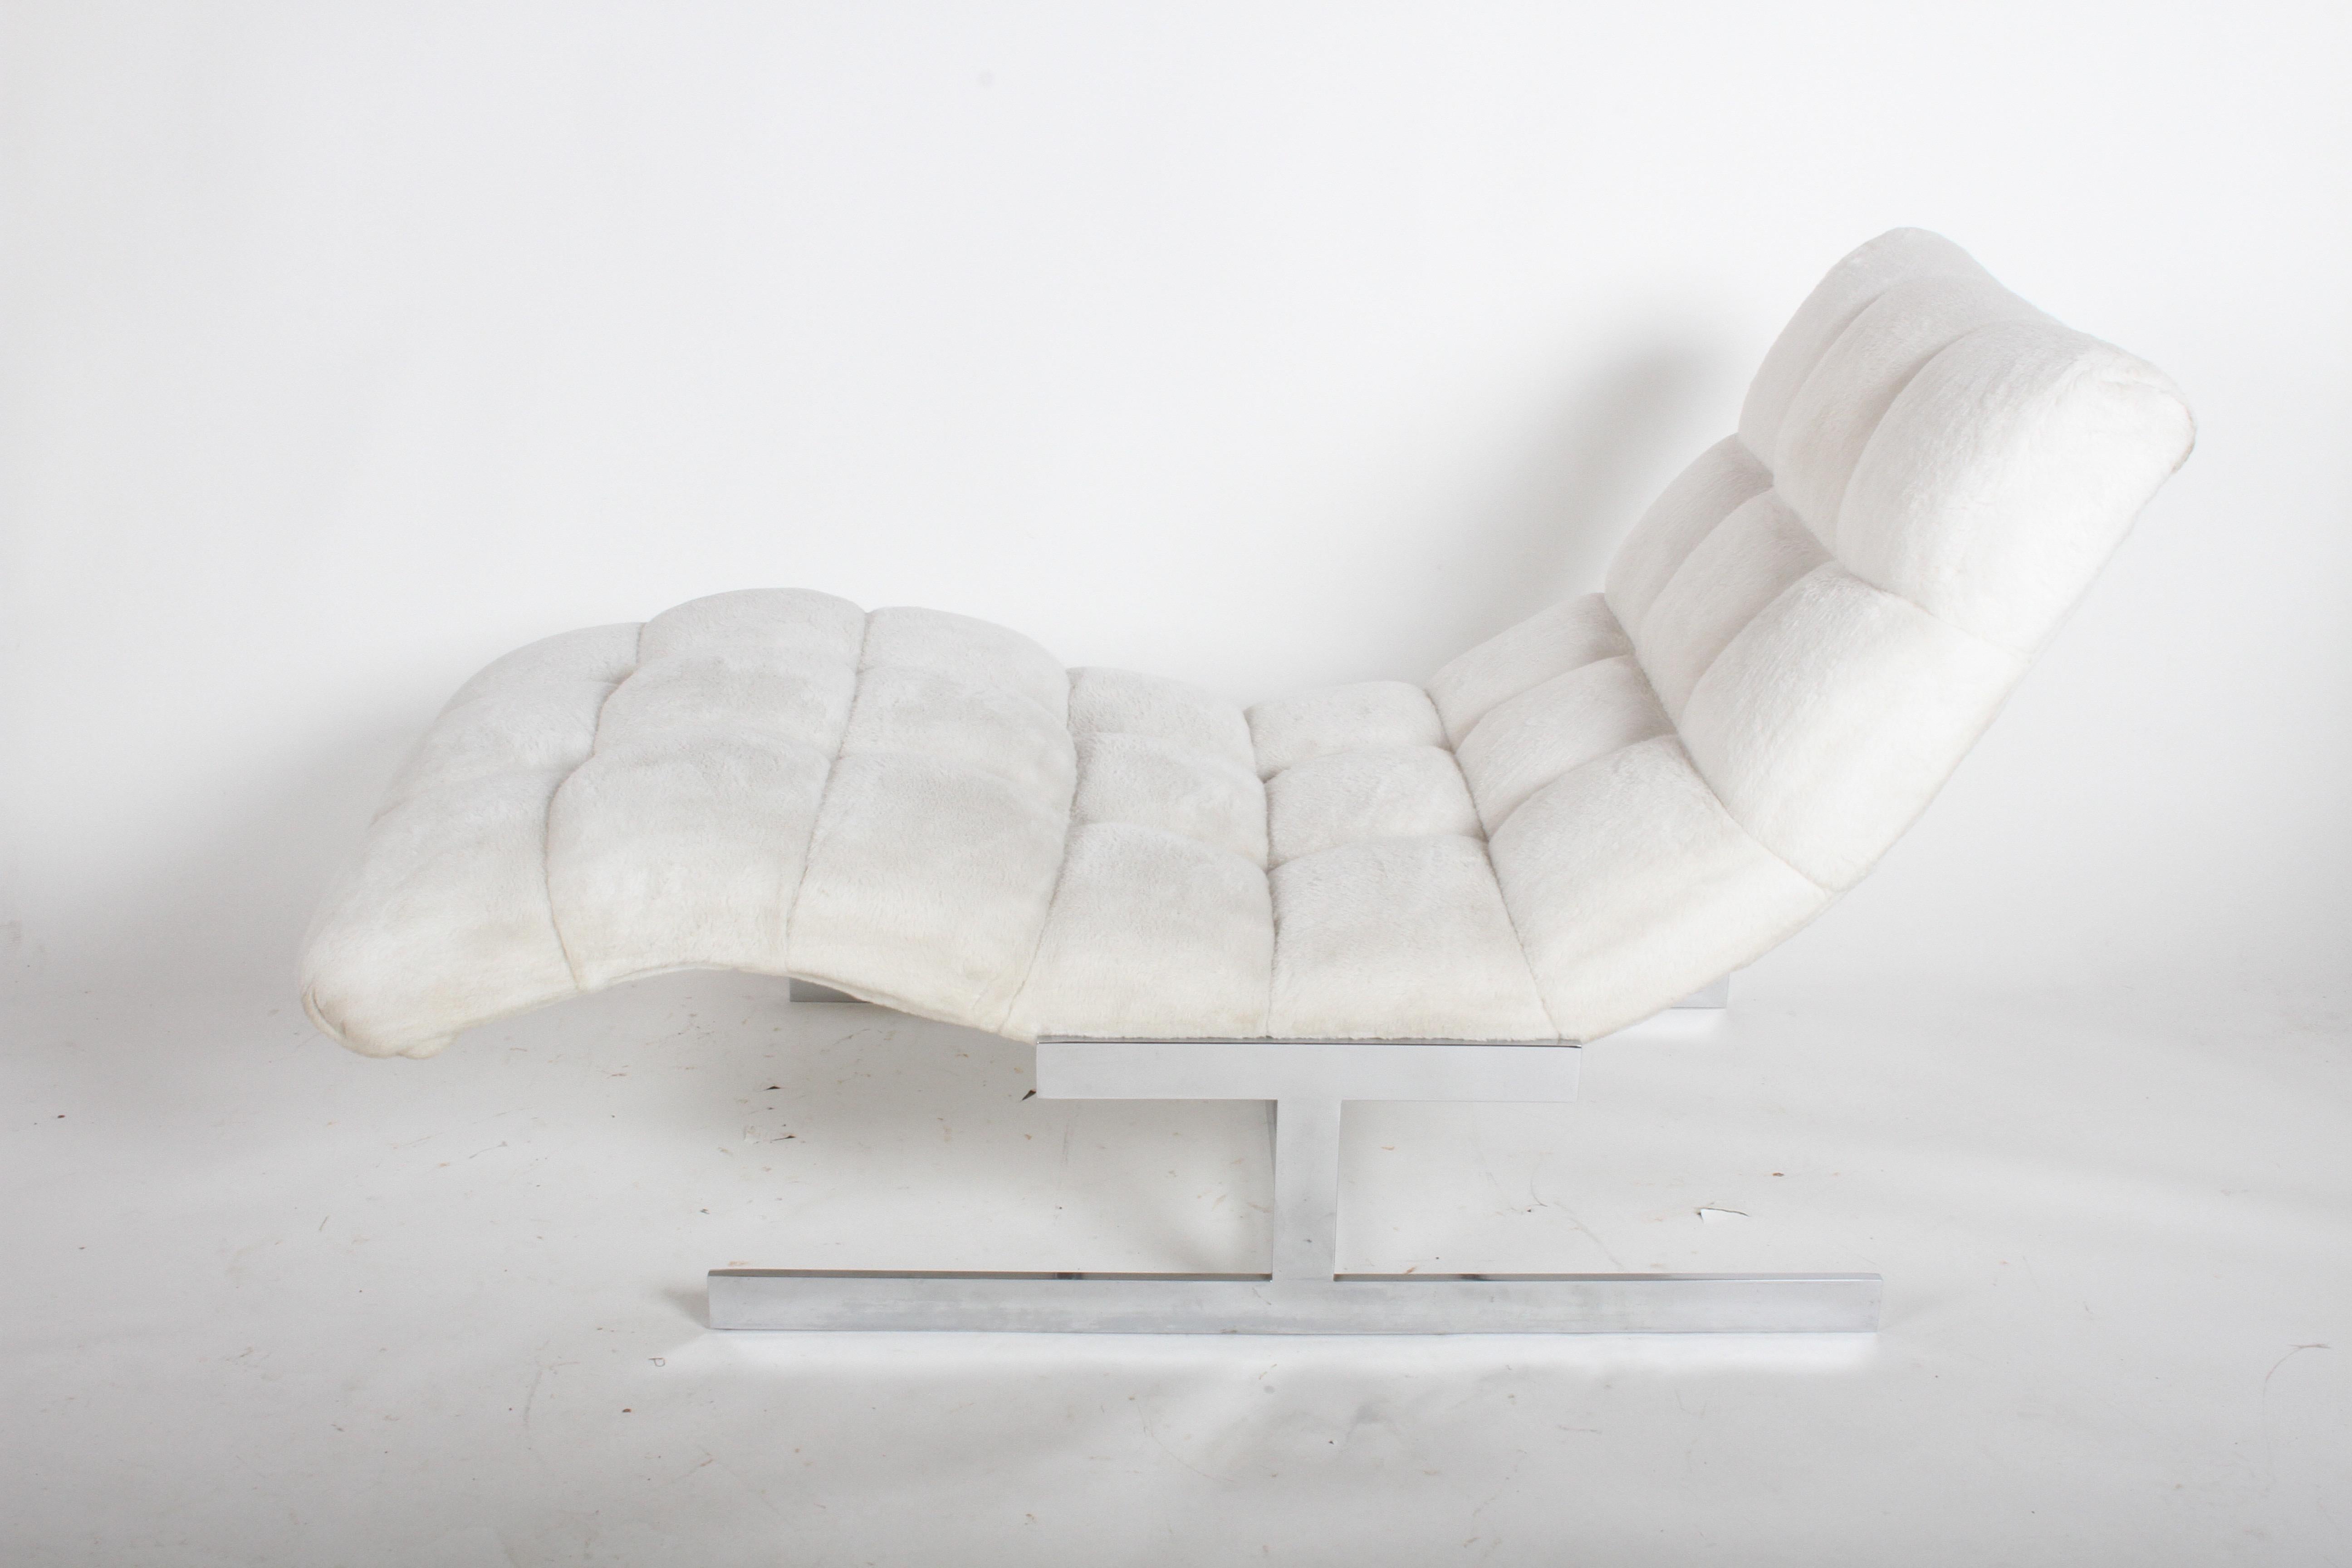 Vintage 1960s-1970s wave form floating chaise longue with original white tufted upholstery and chrome frame. Upholstery has been professionally cleaned, but should be updated if perfection is required. Chrome is bright and in nice vintage condition.